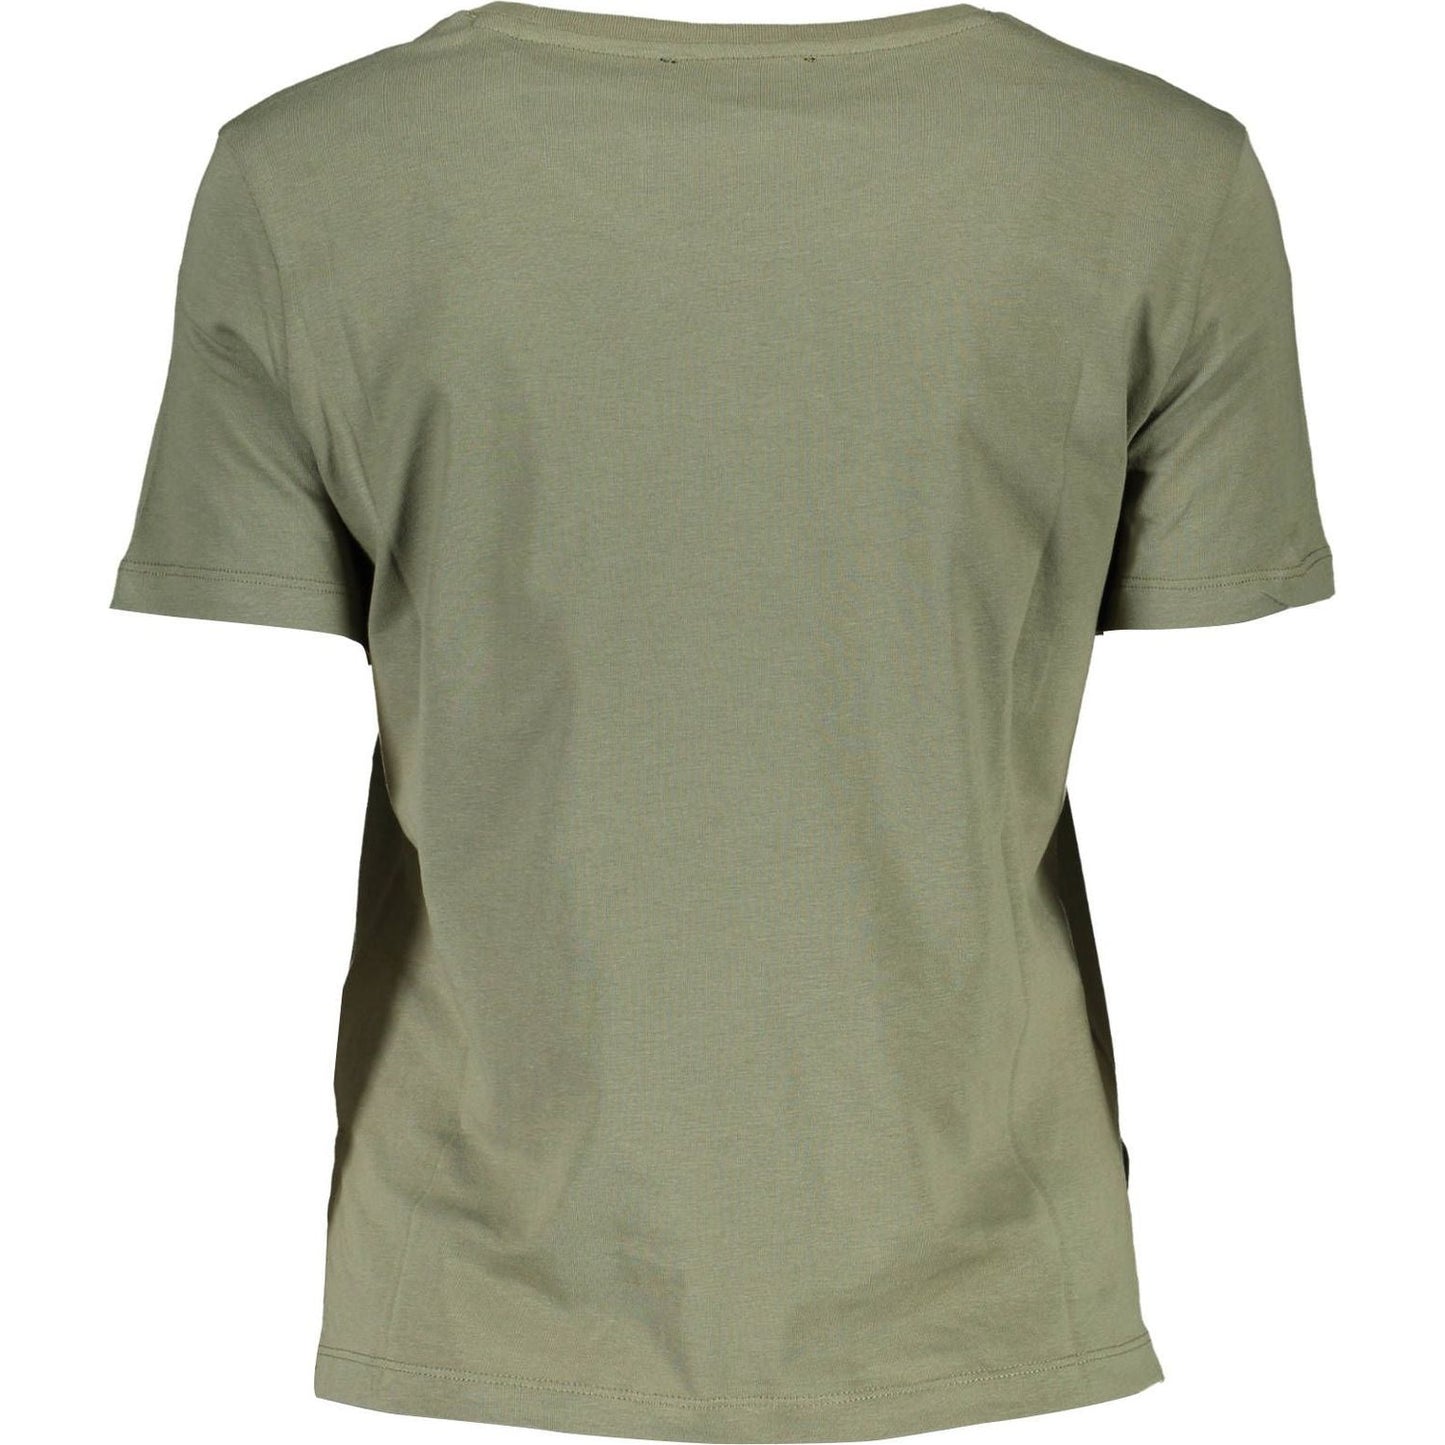 Guess Jeans Chic Green Logo Tee with Short Sleeves chic-green-logo-tee-with-short-sleeves